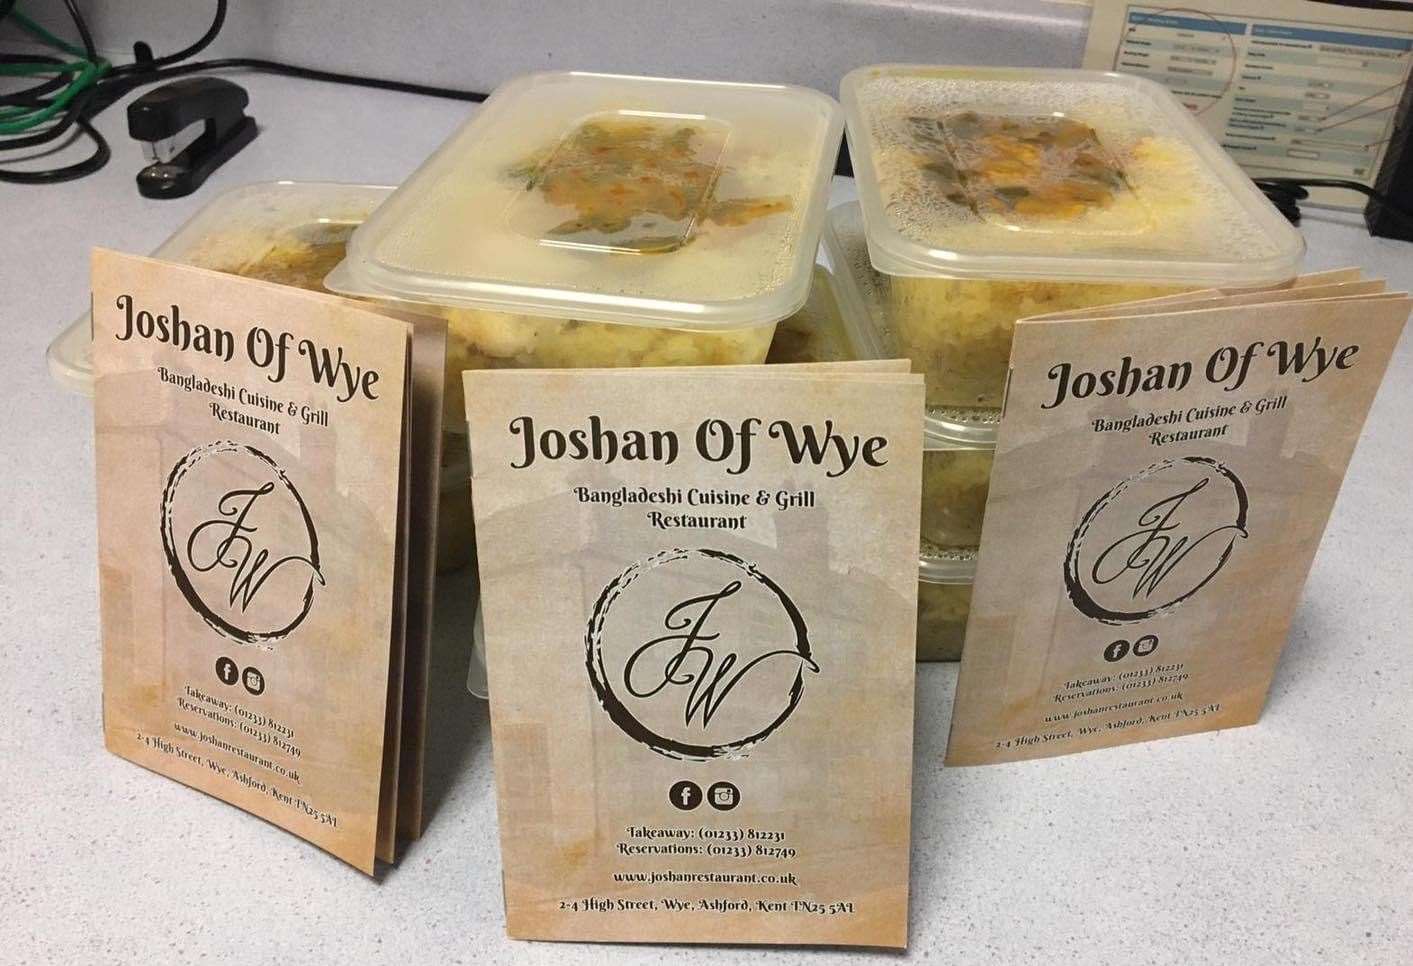 Joshan of Wye Indian restaurant in Wye near Ashford has supported the NHS and provided takeaways in lockdown